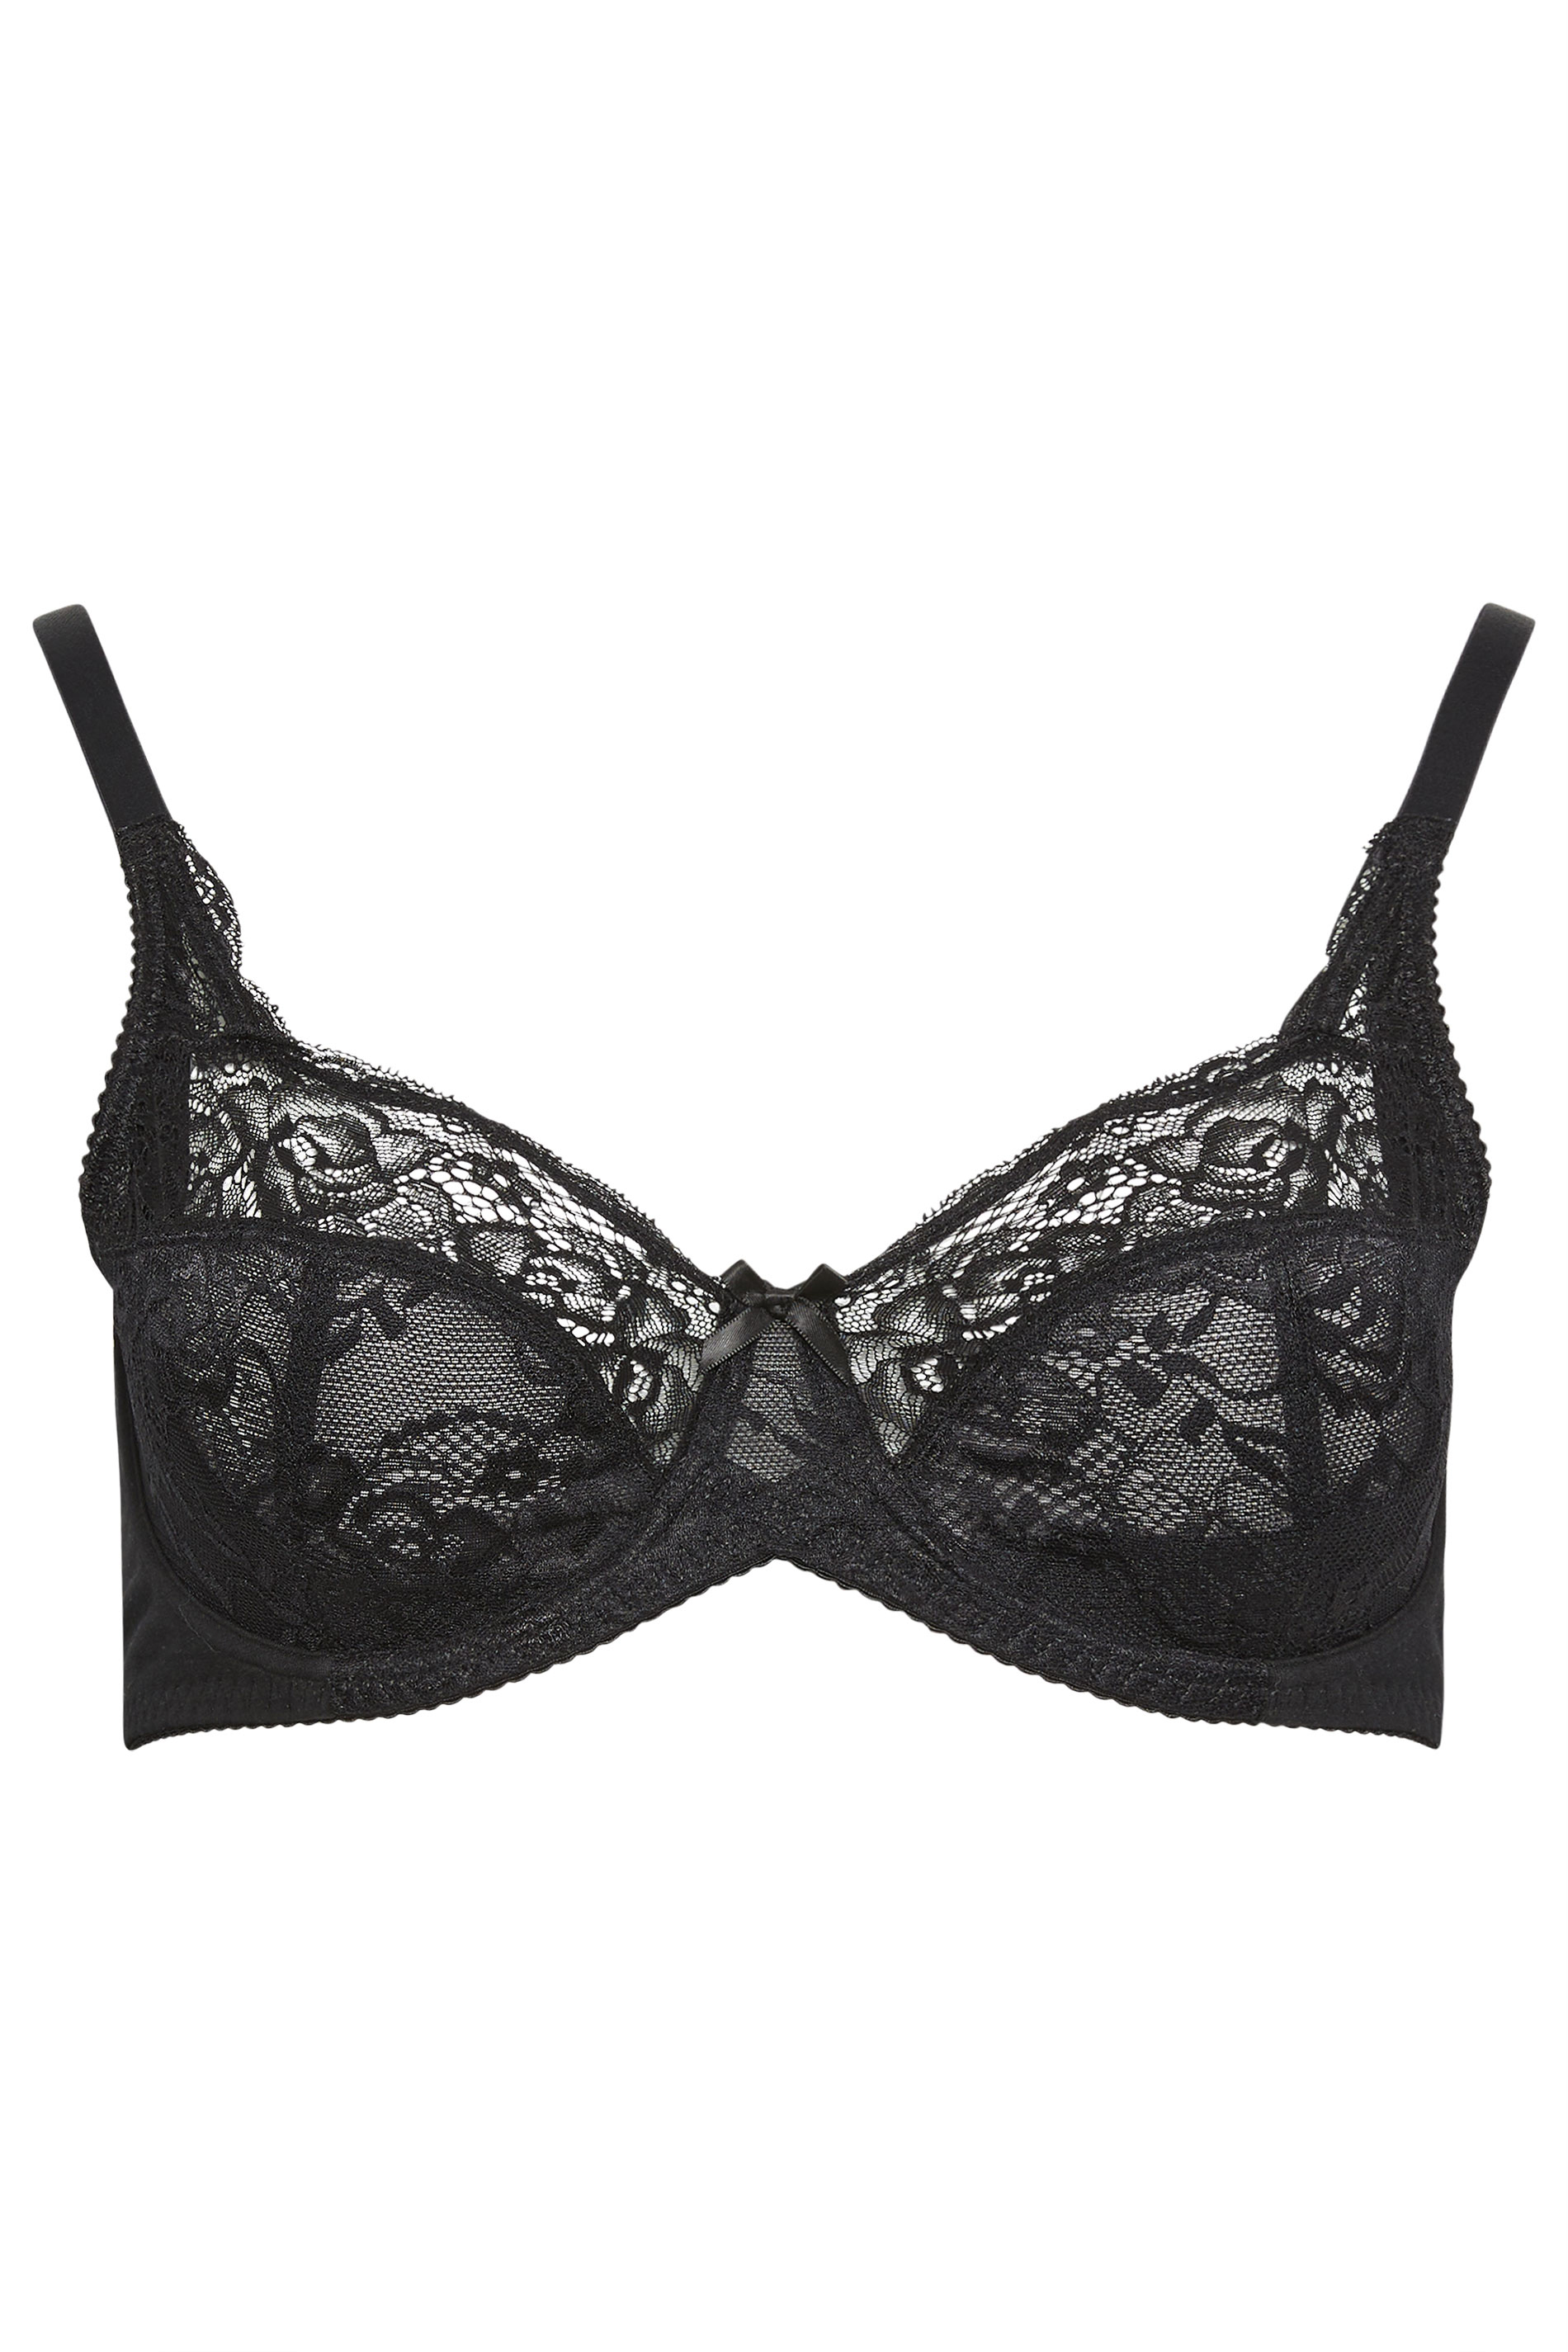 Buy CG-13 Non Padded Embroidered Net Bra-Floral Craft Jet Black in